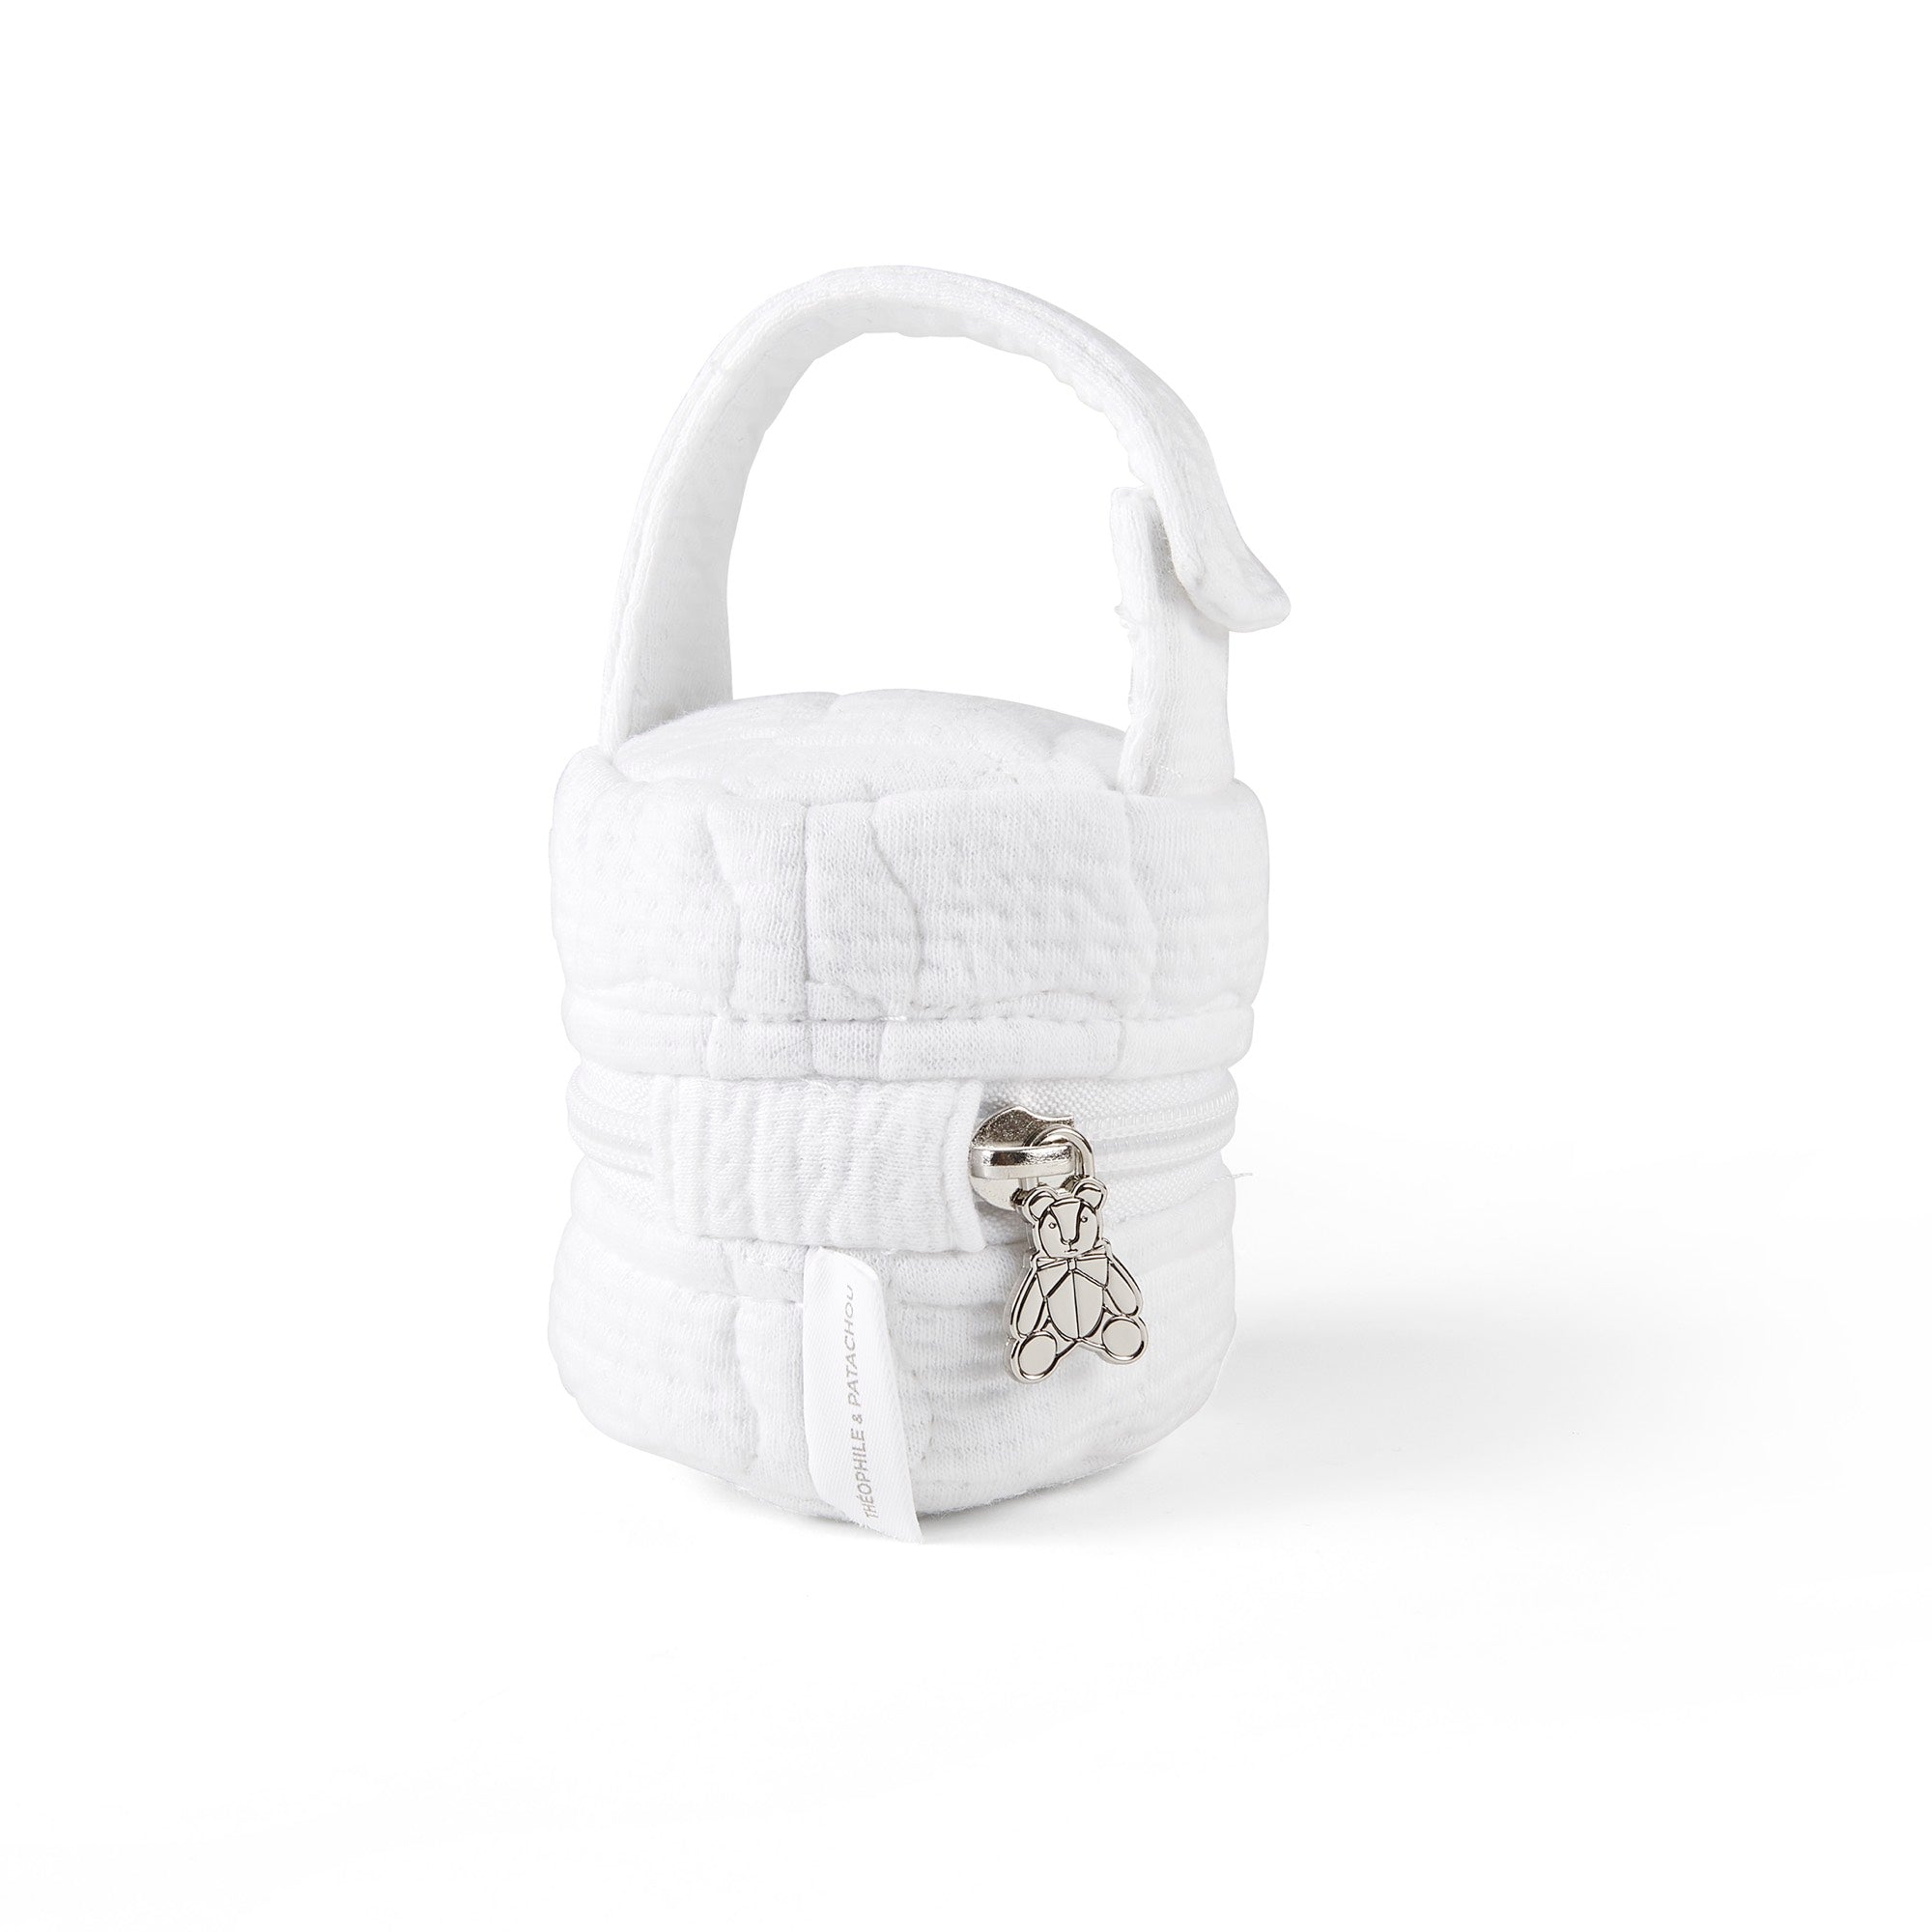 Theophile & Patachou Pacifier Cover - Cotton White